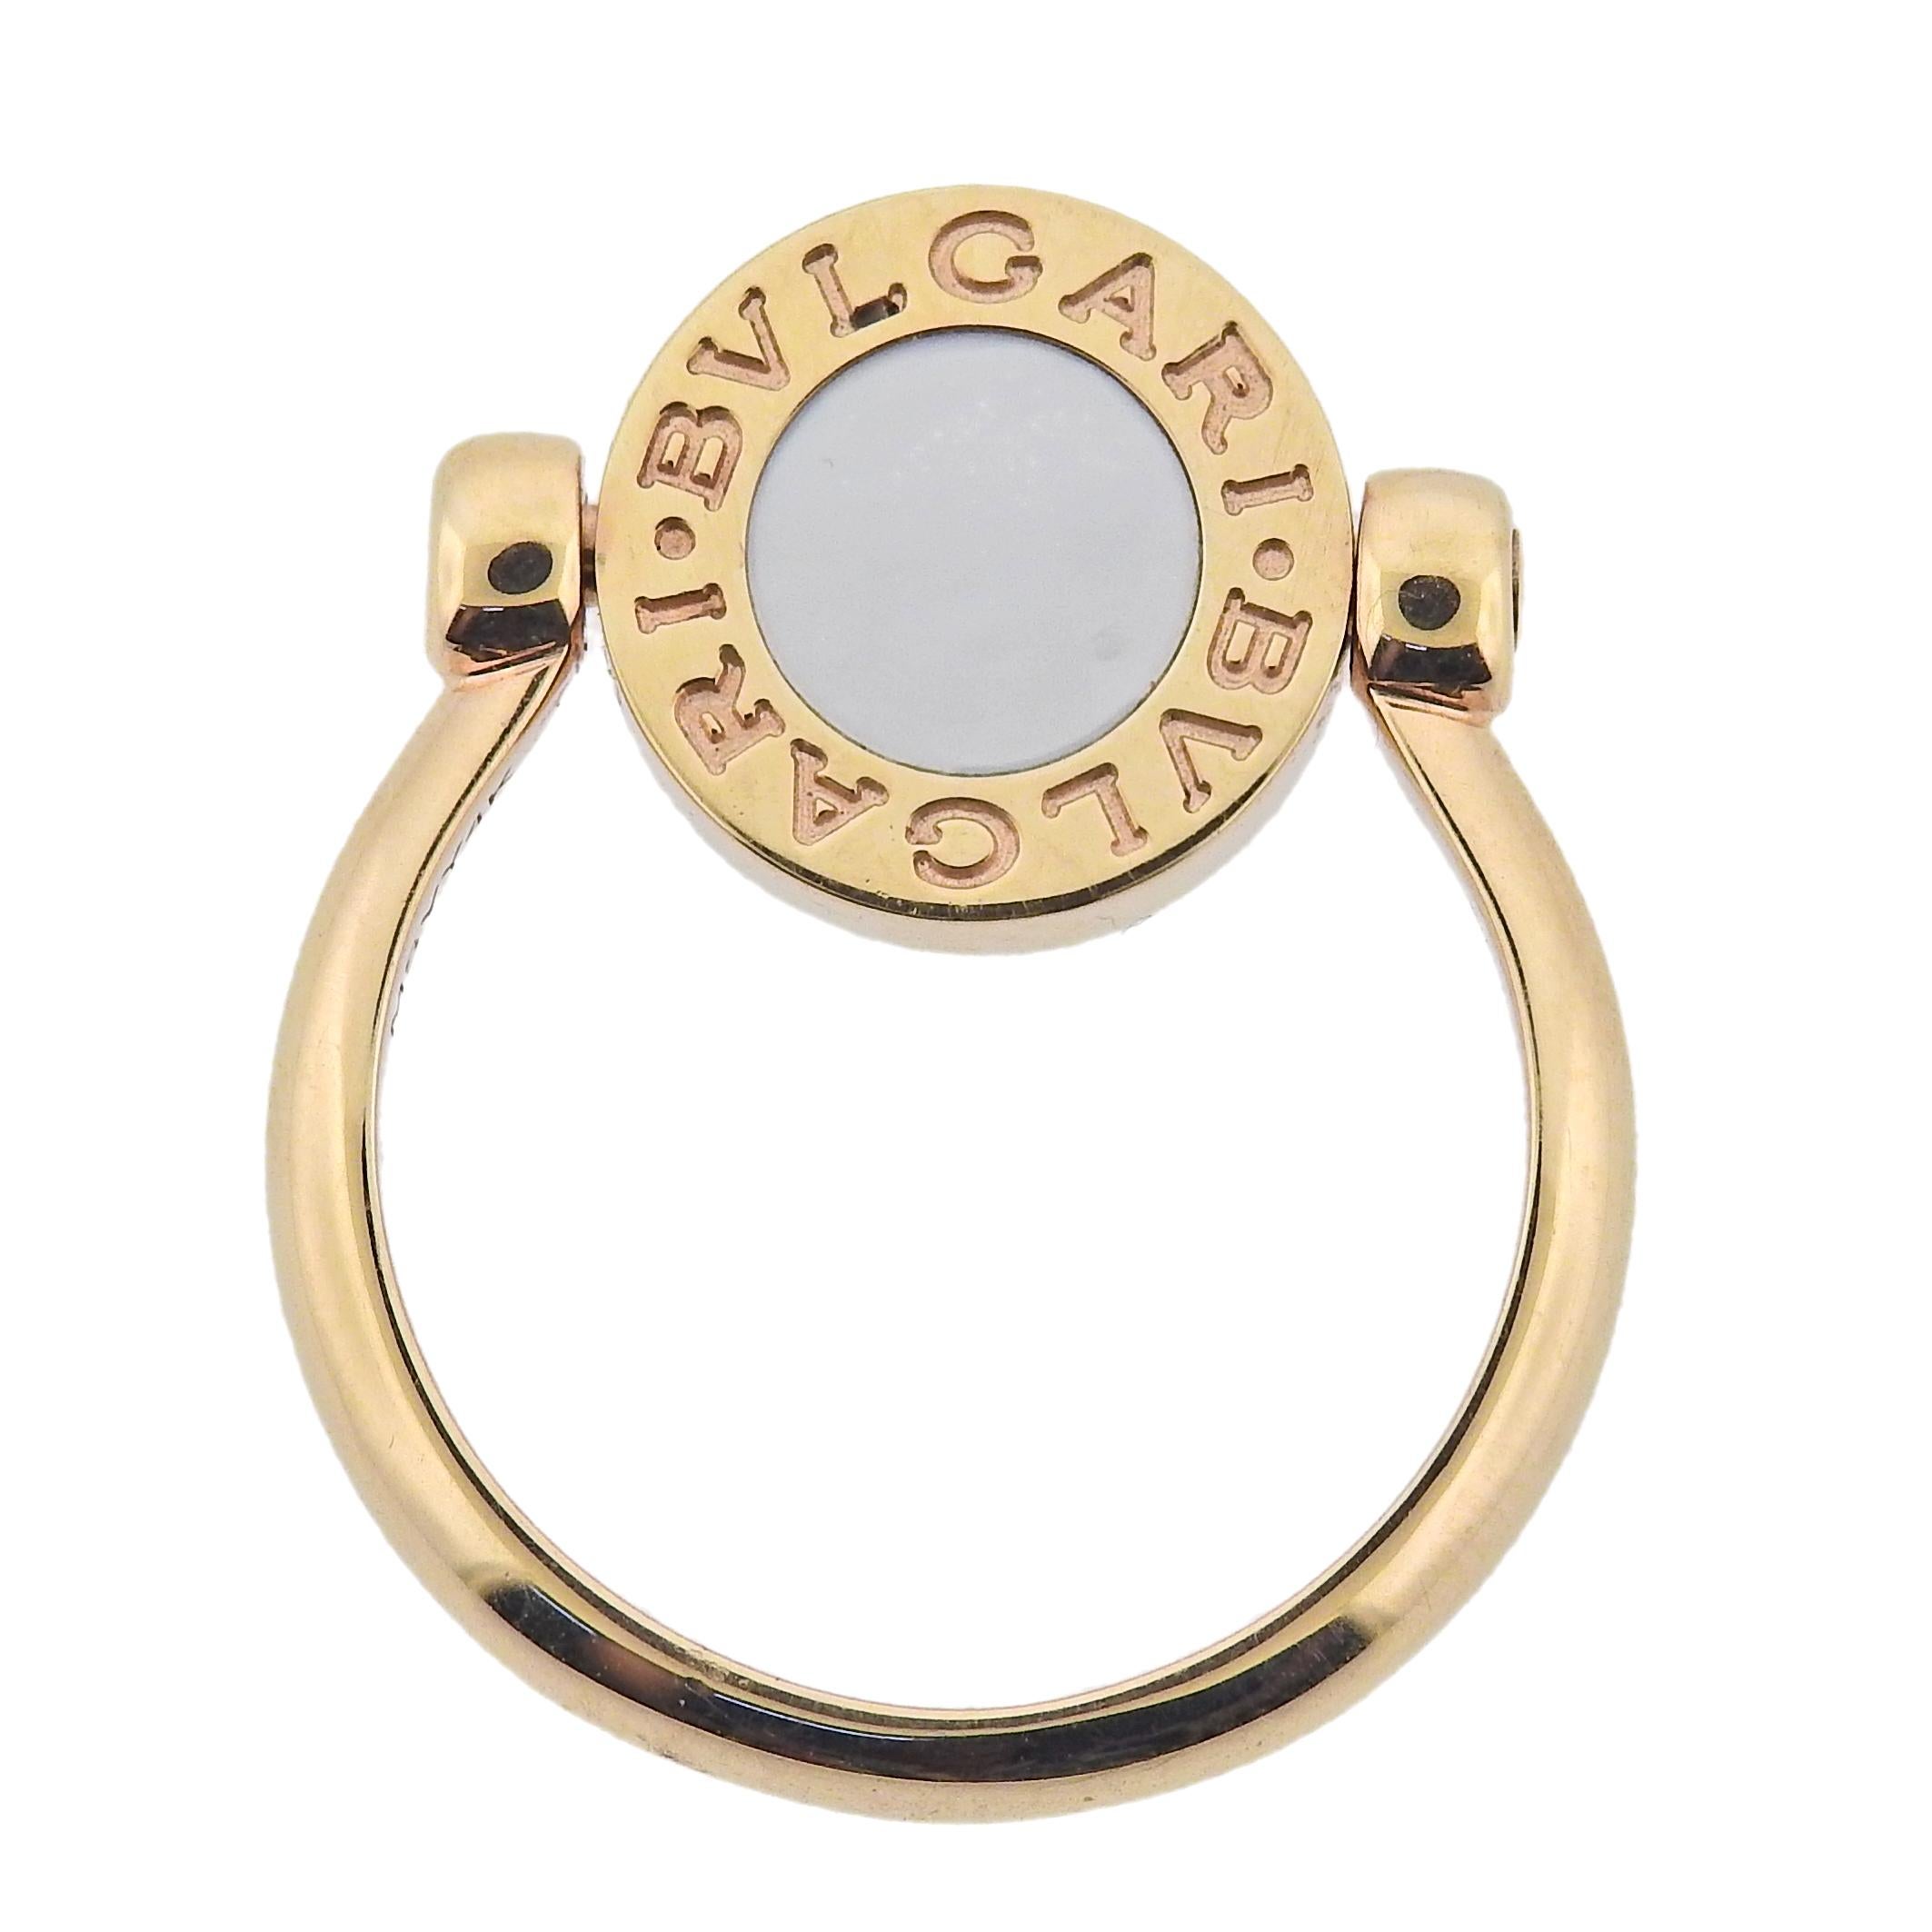 18k rose gold Bvlgari flip top ring, with carnelian and mother of pearl. Retail $2640. Comes with COA and box. Ring top is 12mm in diameter. Marked Bvlgari, made in Italy, Italian mark, 750, Serial number. Weight 5.5 grams. Available in sizes 49,